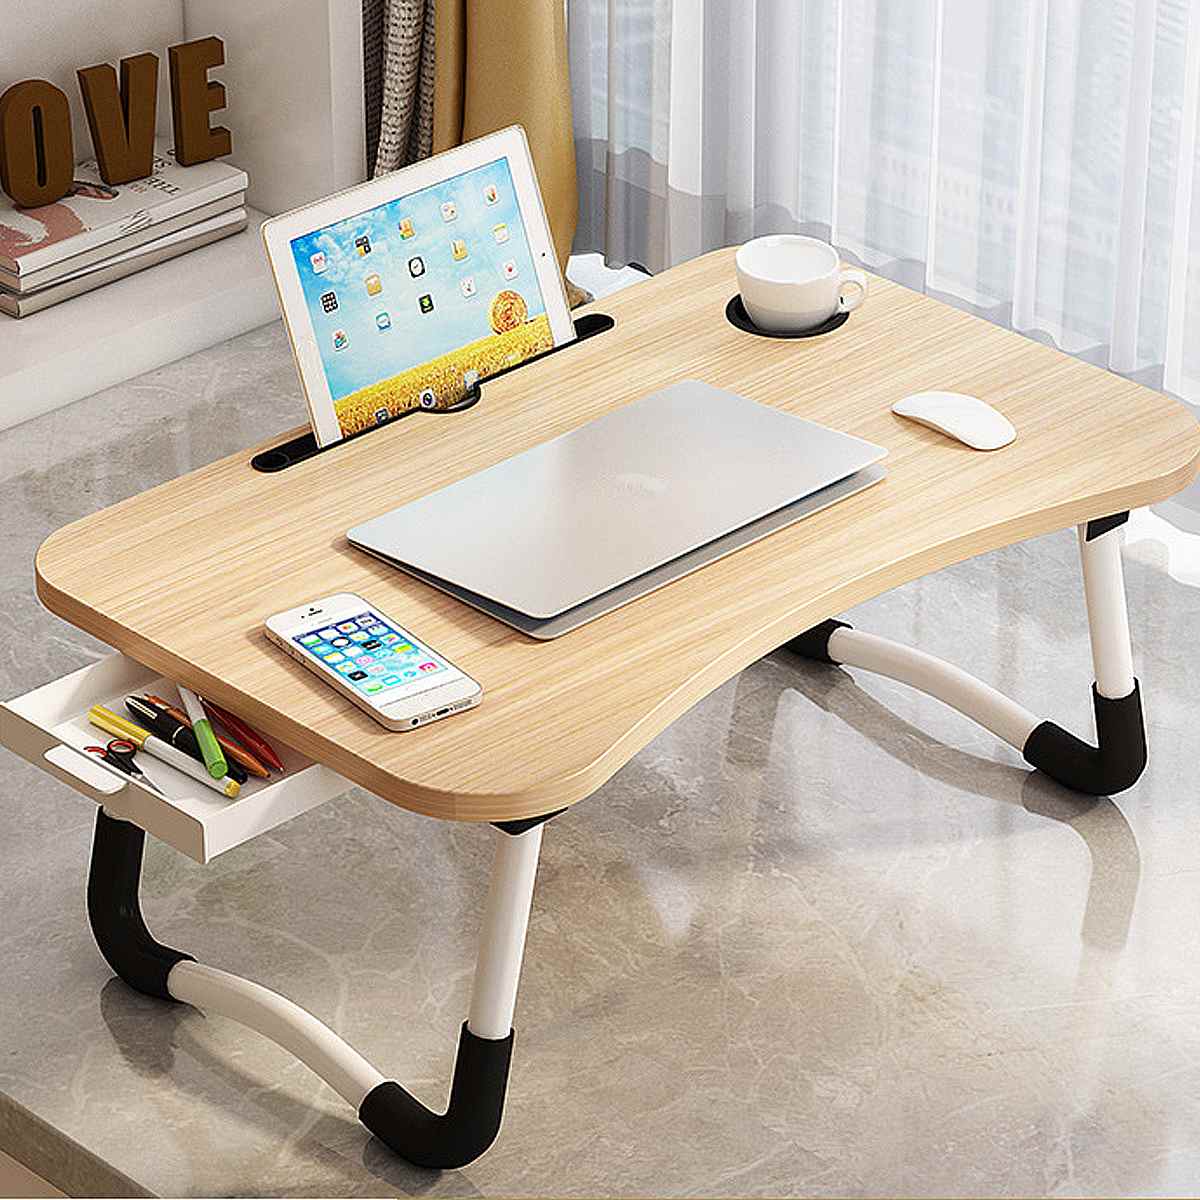 Folding Laptop Stand Holder Study Table Desk Wooden Foldable Computer Desk for Bed Sofa Tea Serving Table Stand